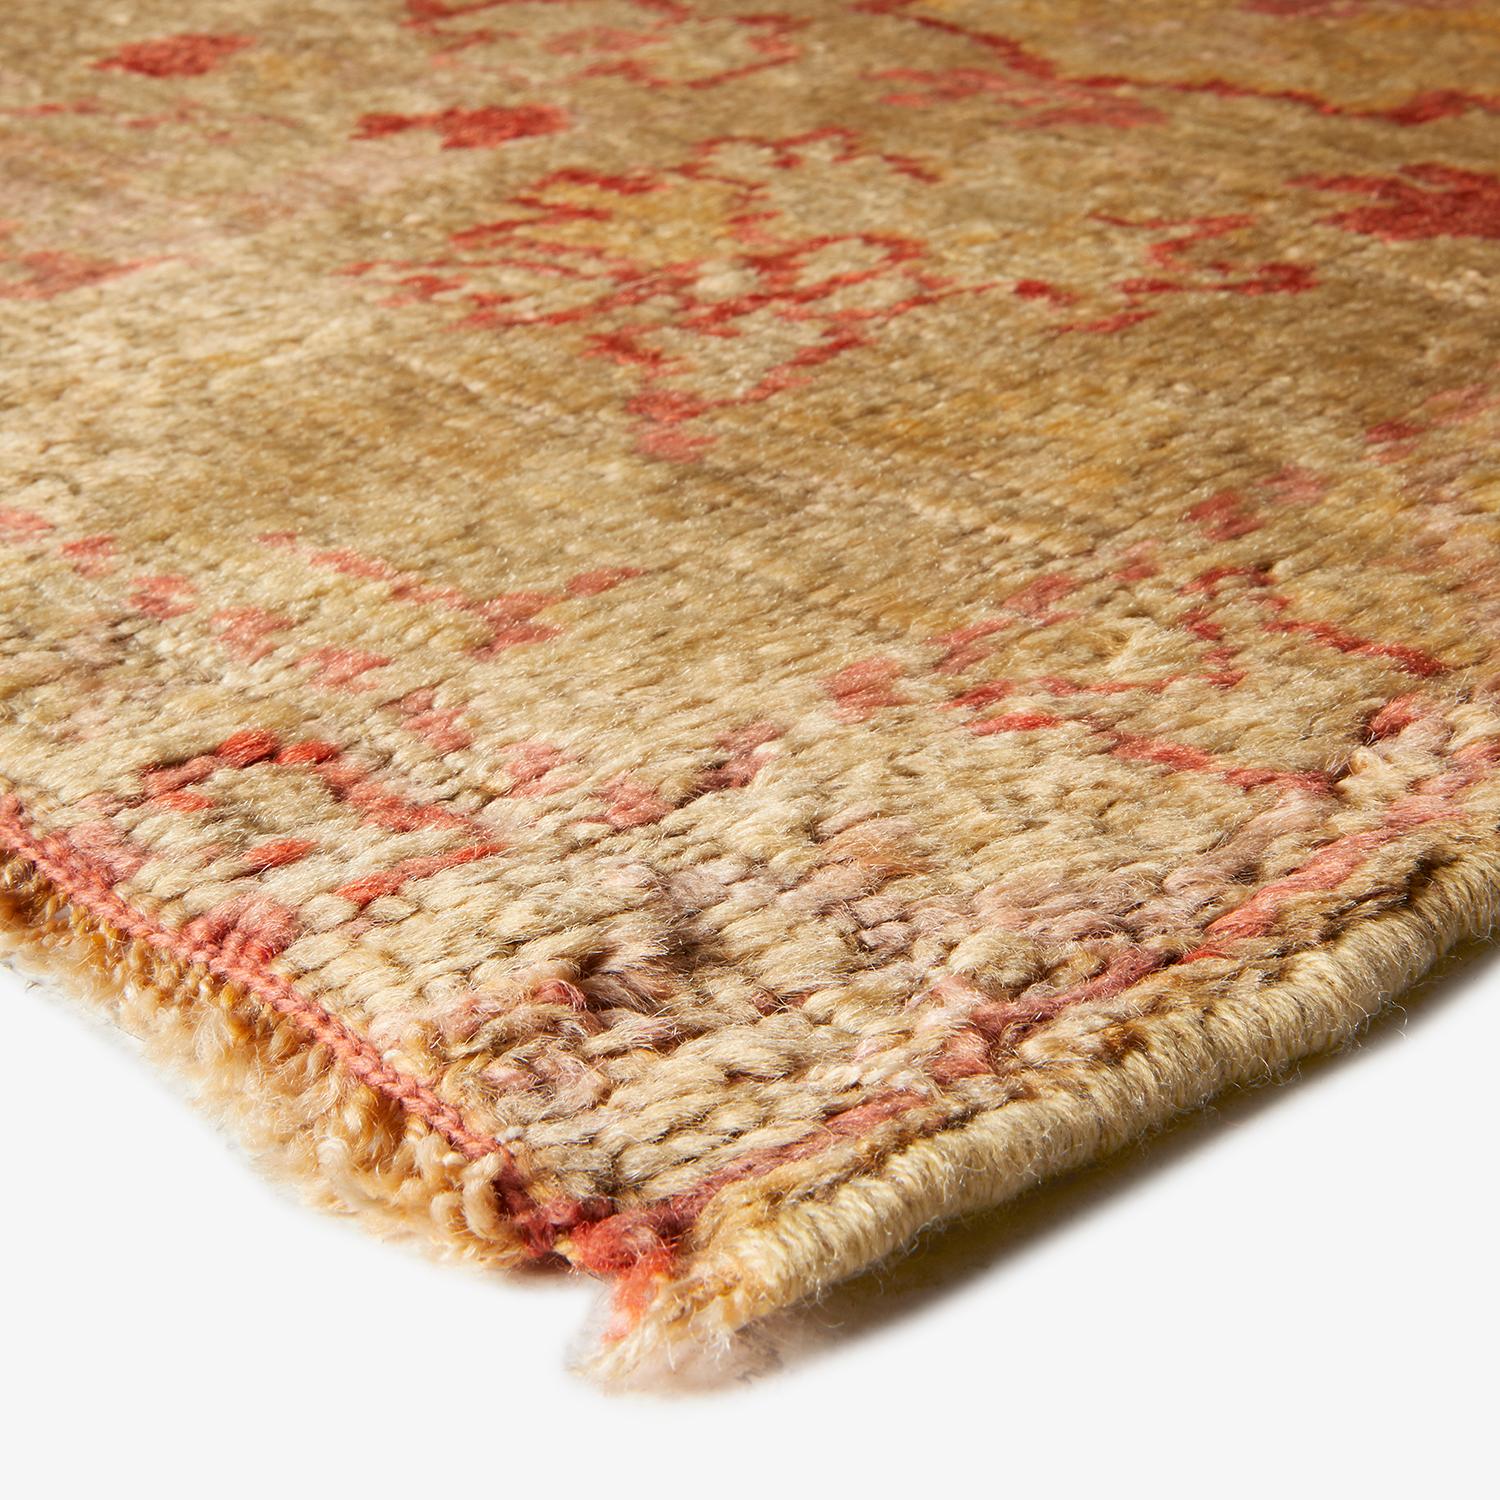 The Red Antique Turkish Oushak Rug - 10'1